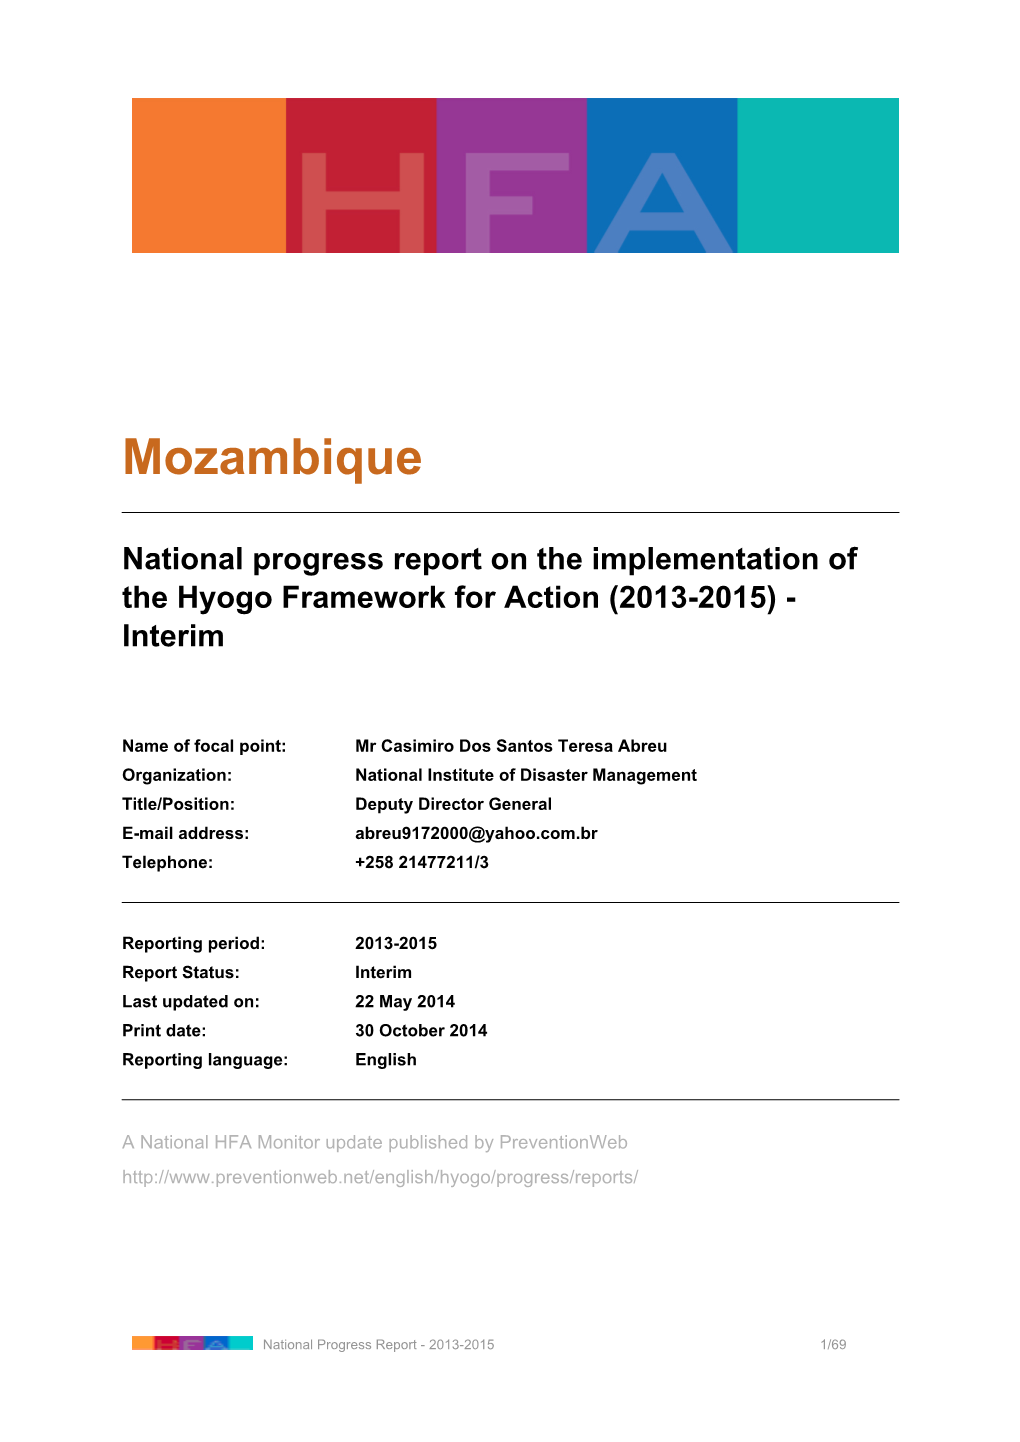 Mozambique: National Progress Report on the Implementation of The